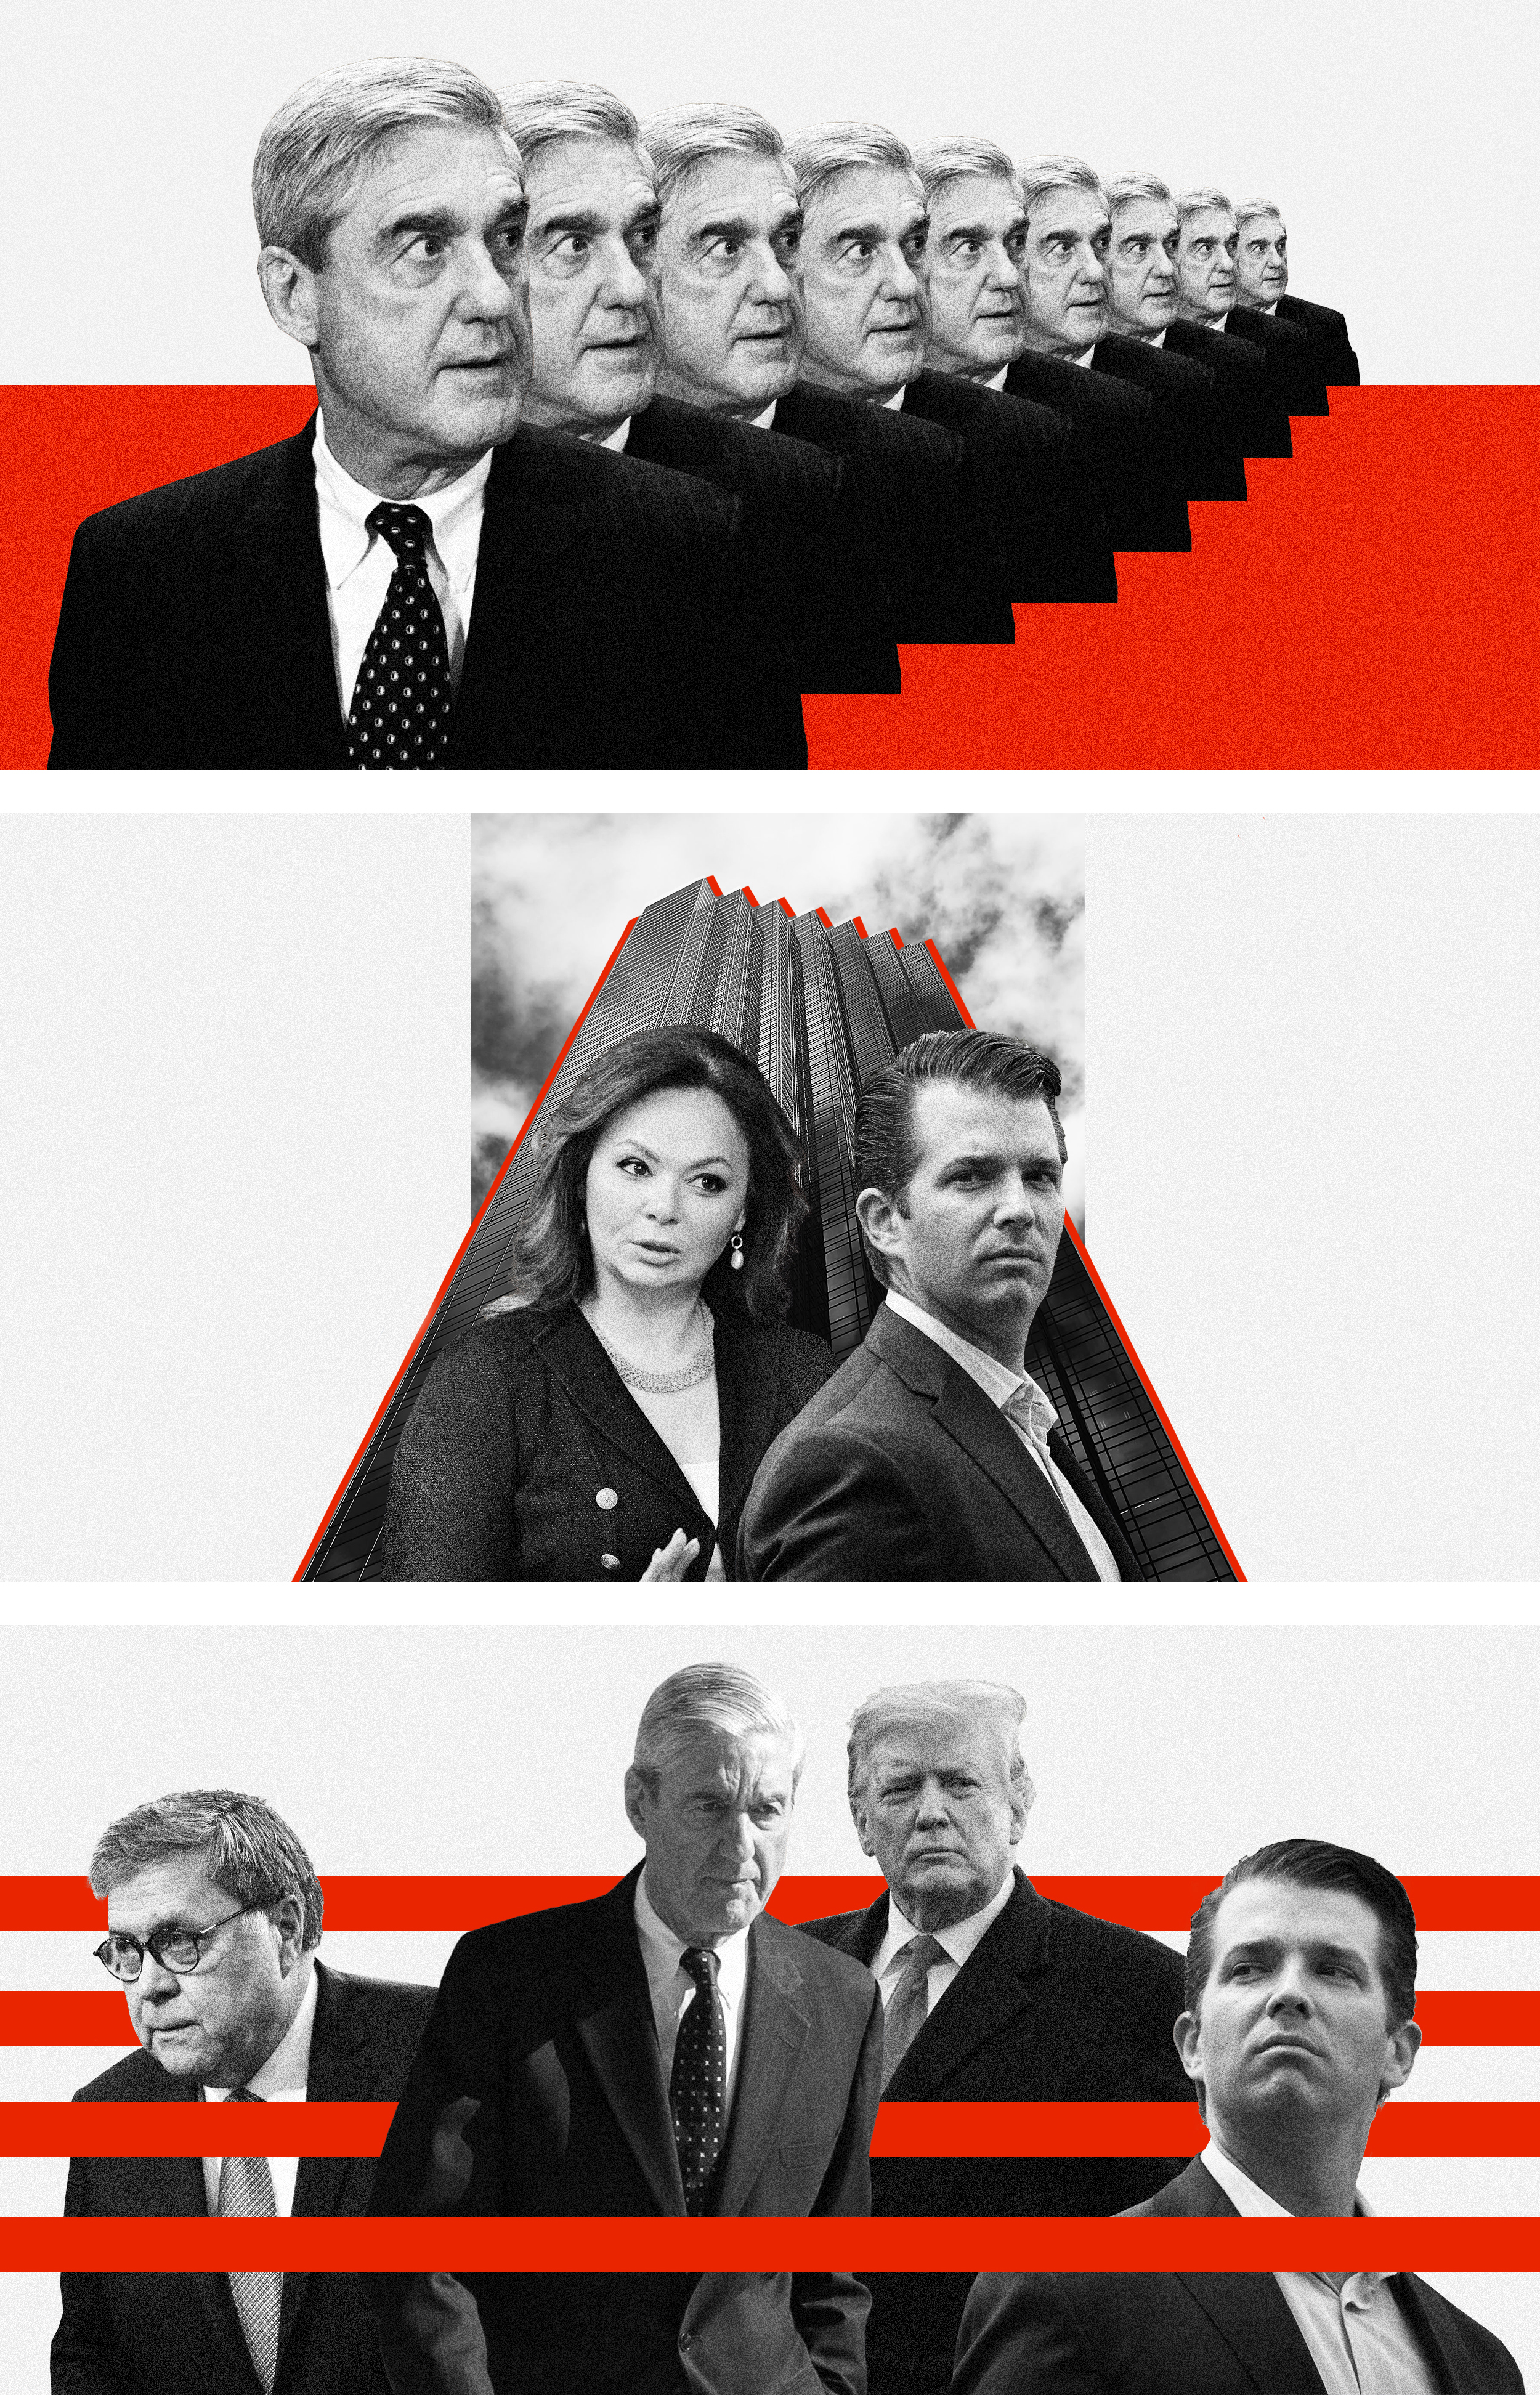   Series of illustrations on The Mueller Report for NBC News:    Here's what we still don't know about why Mueller didn't charge Trump with obstruction    Mueller declined to charge Donald Trump Jr. for meeting with Russian lawyer    What is in the M